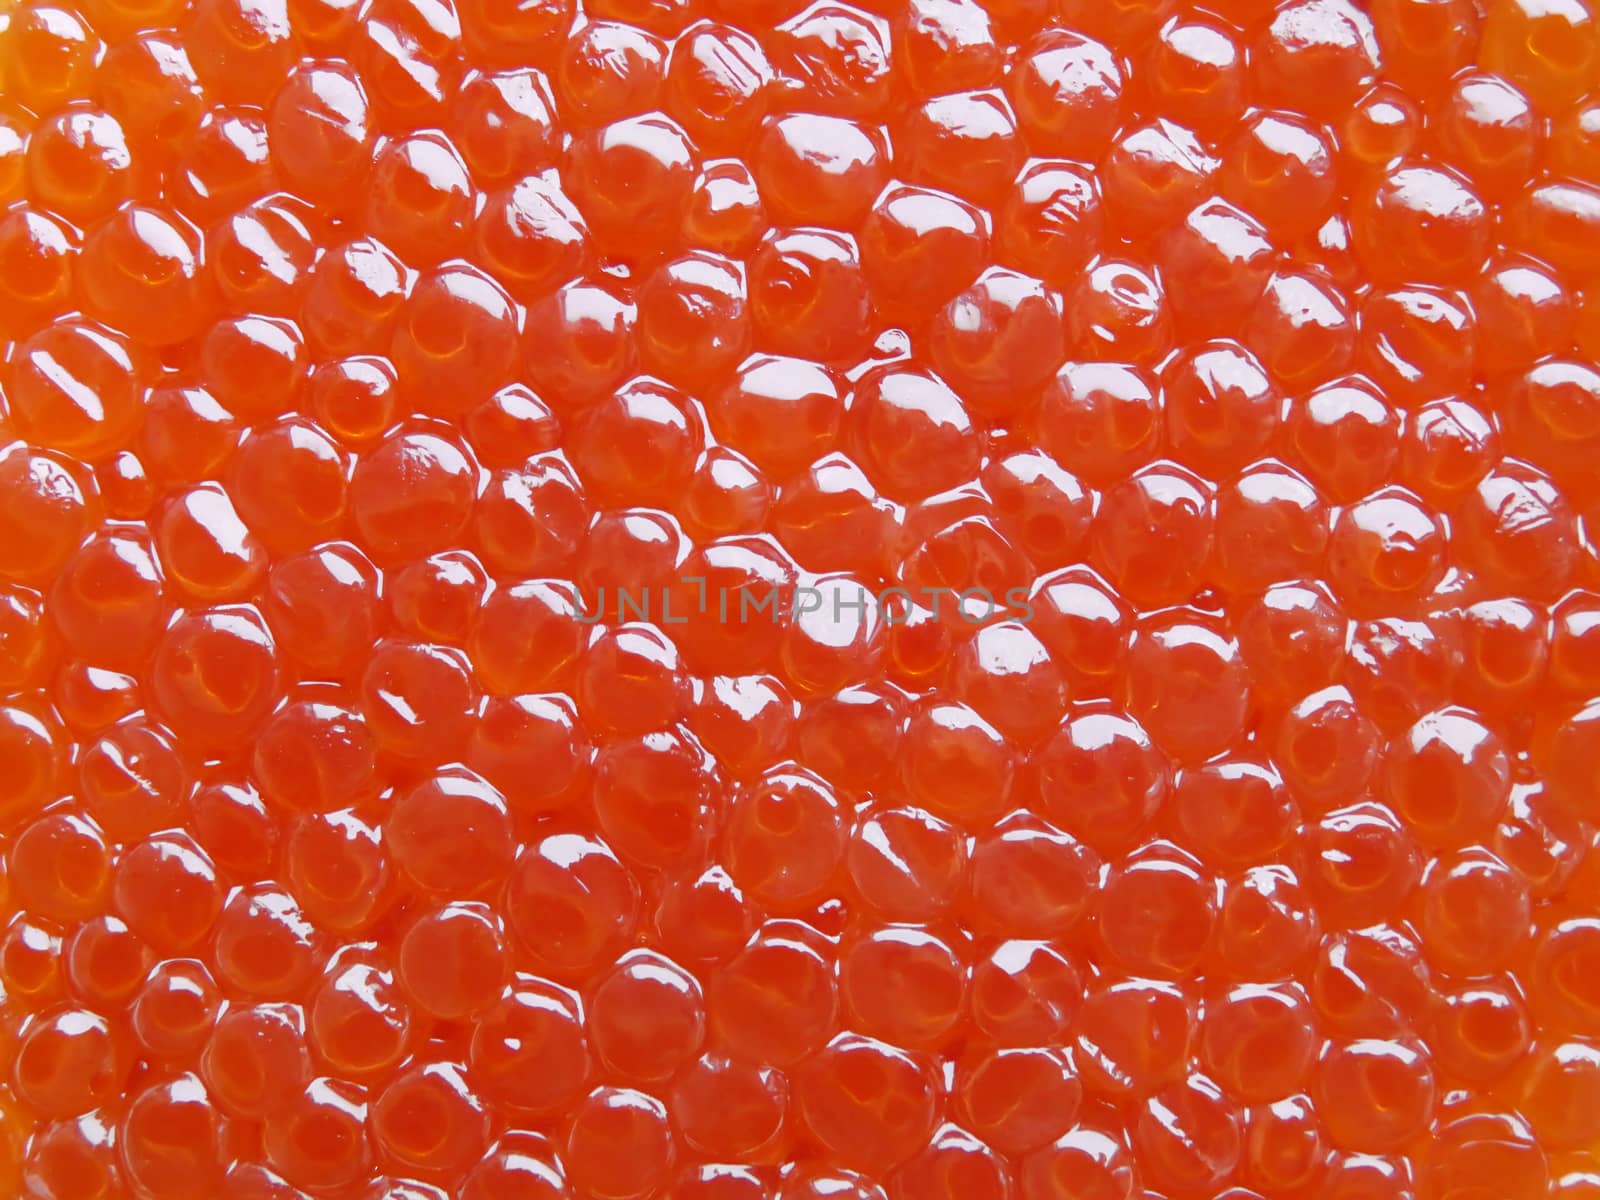 Background pattern of salmon fish red caviar close up